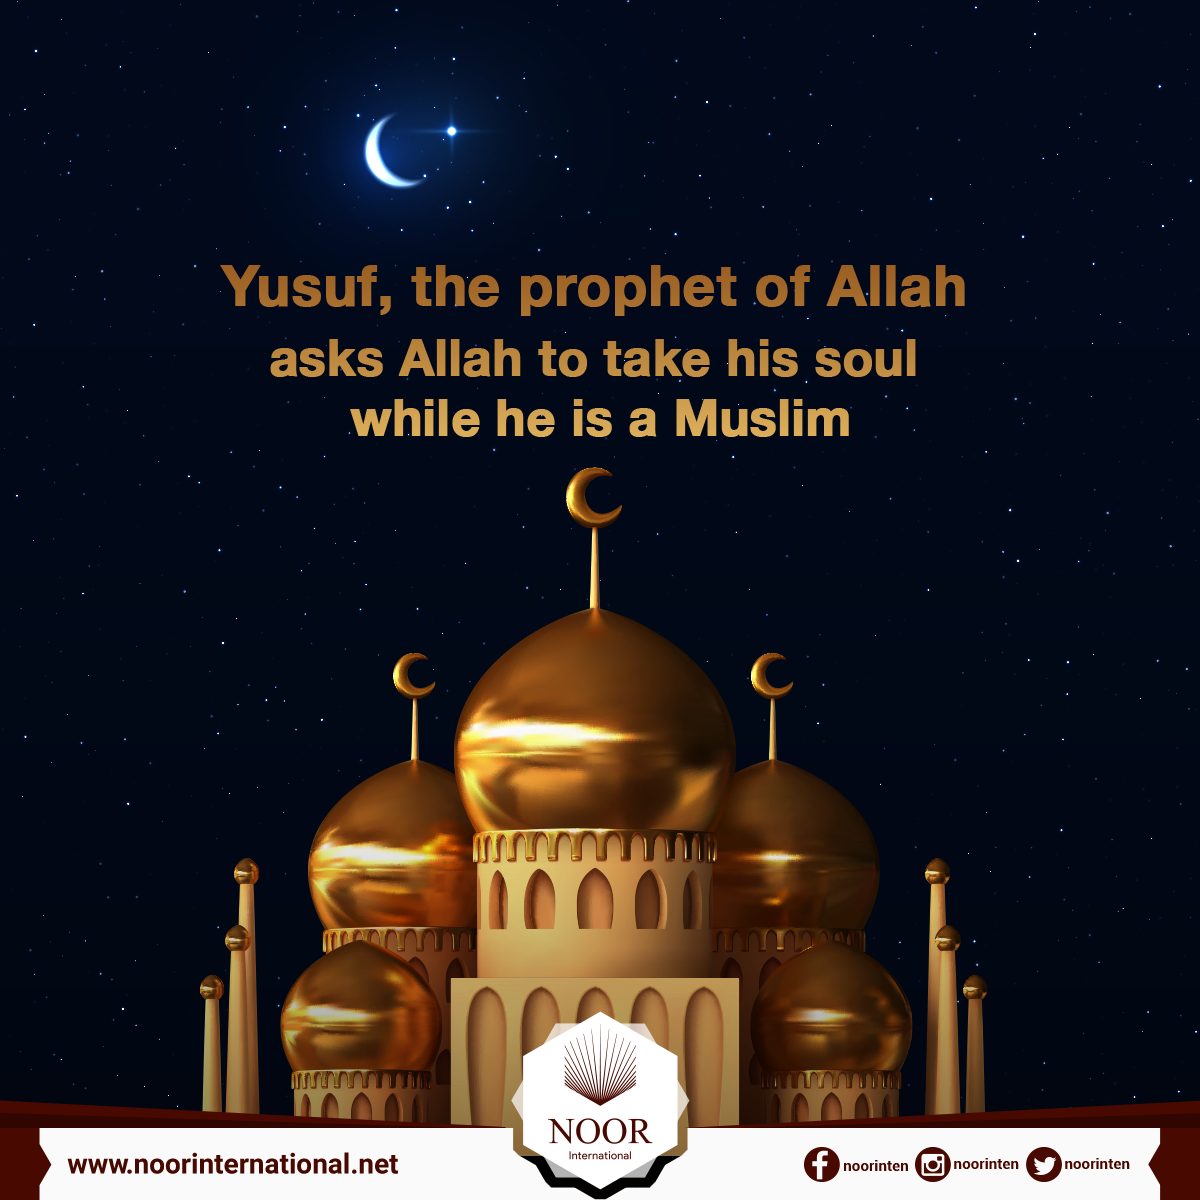 Yusuf, the prophet of Allah, asks Allah to take his soul while he is a Muslim